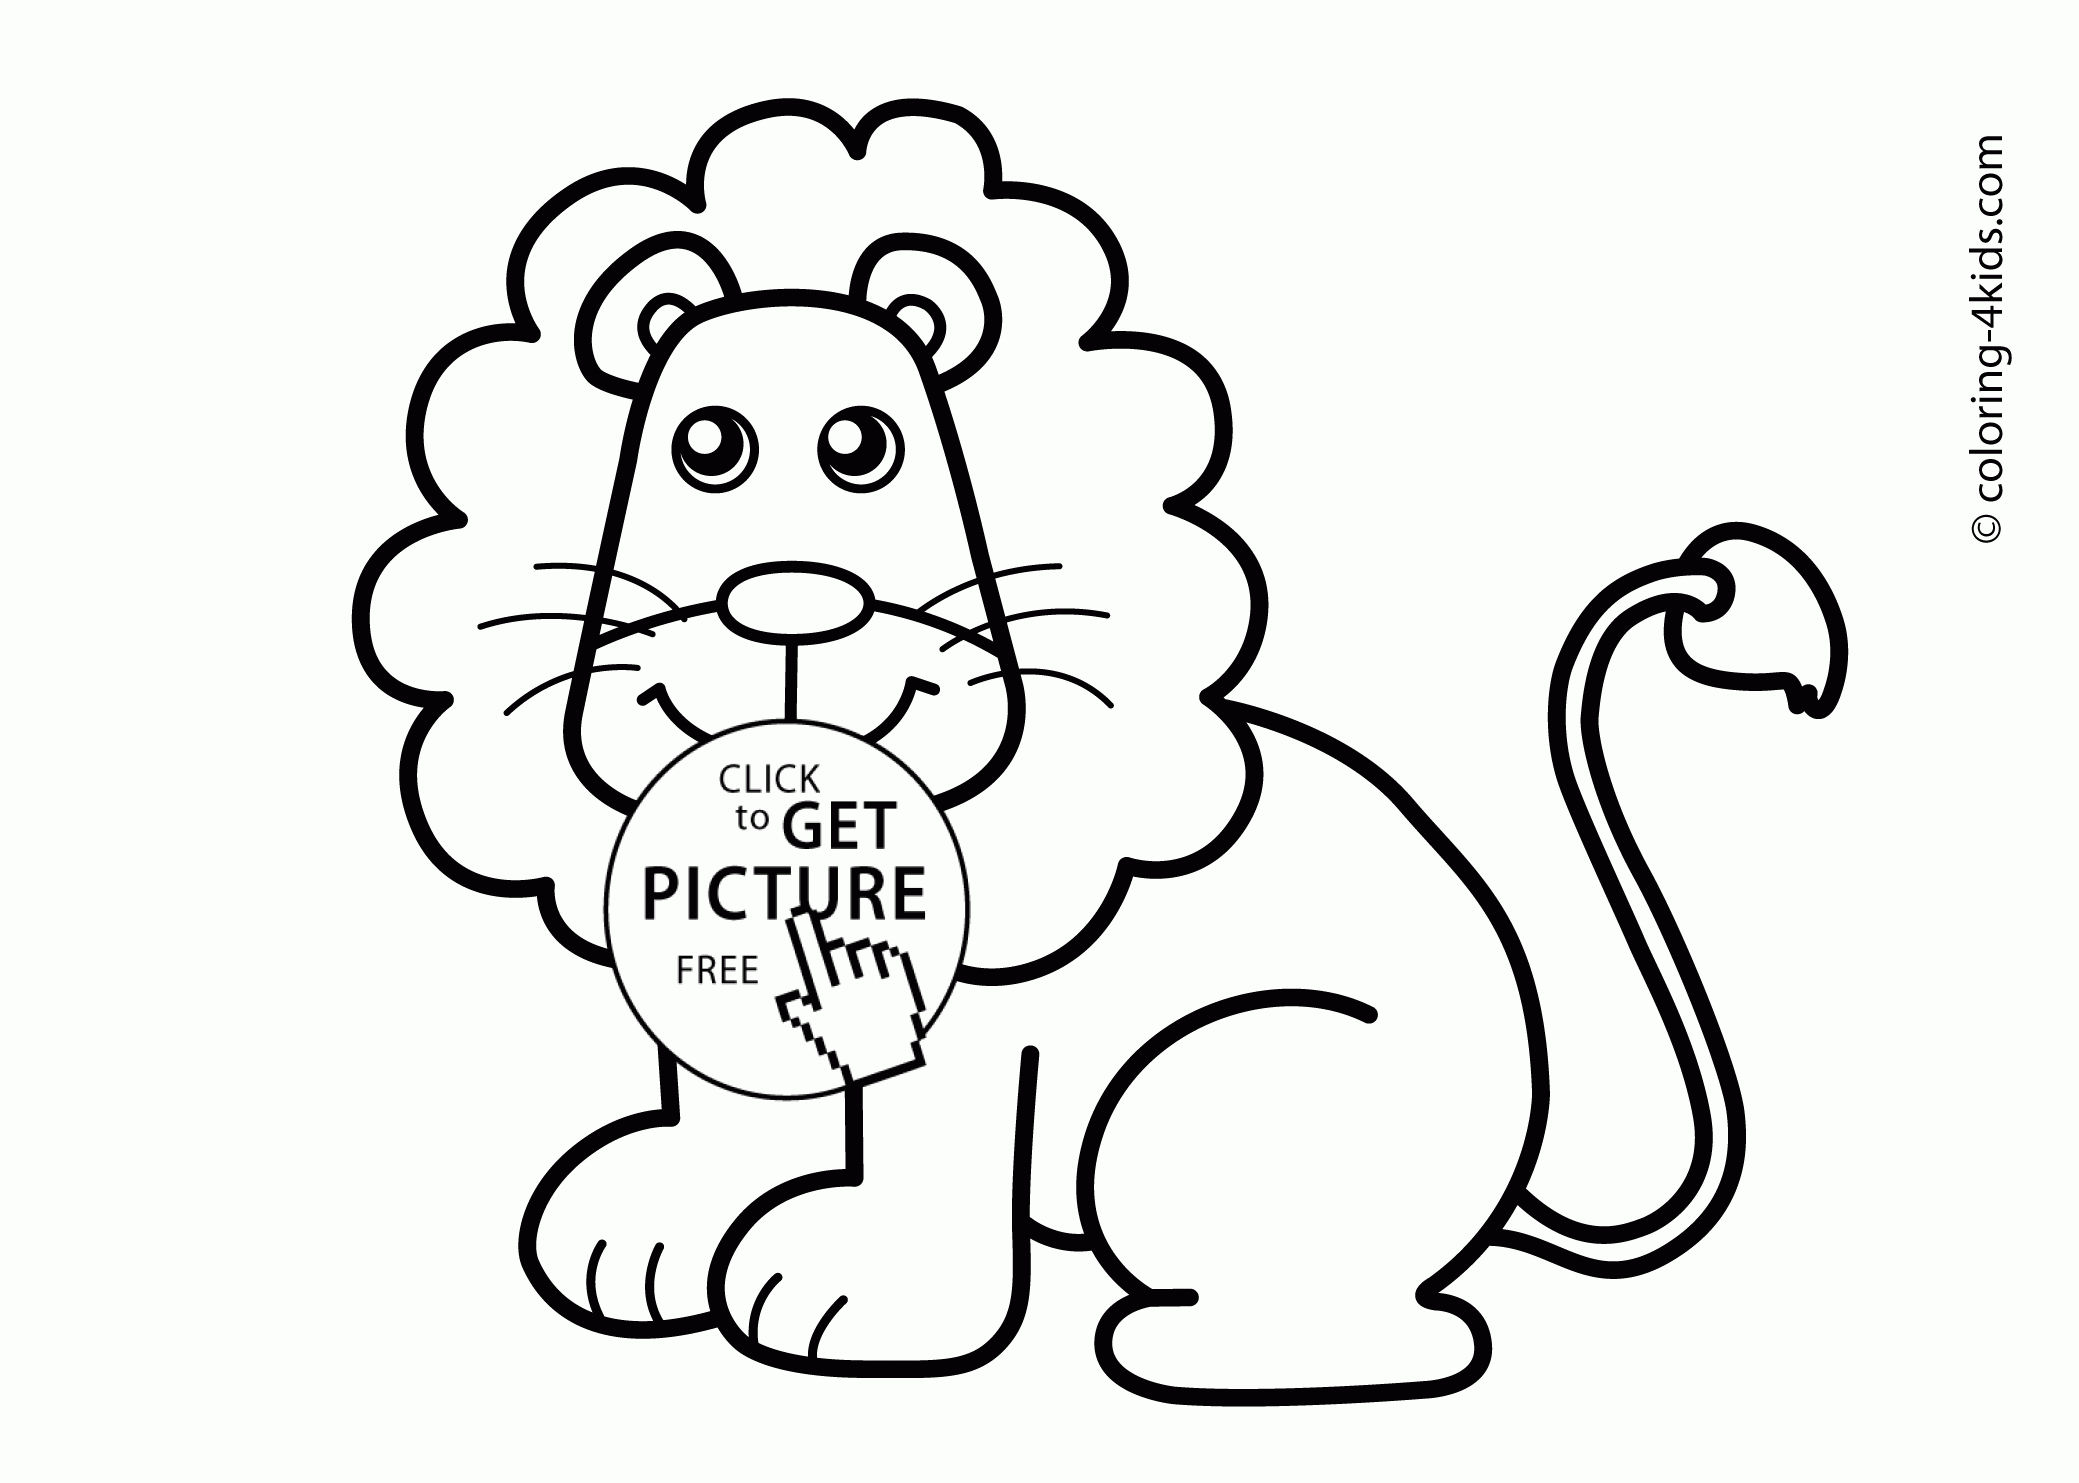 Lion Animals Coloring Pages For Kids, Printable Free - Free Coloring Pages Animals Printable